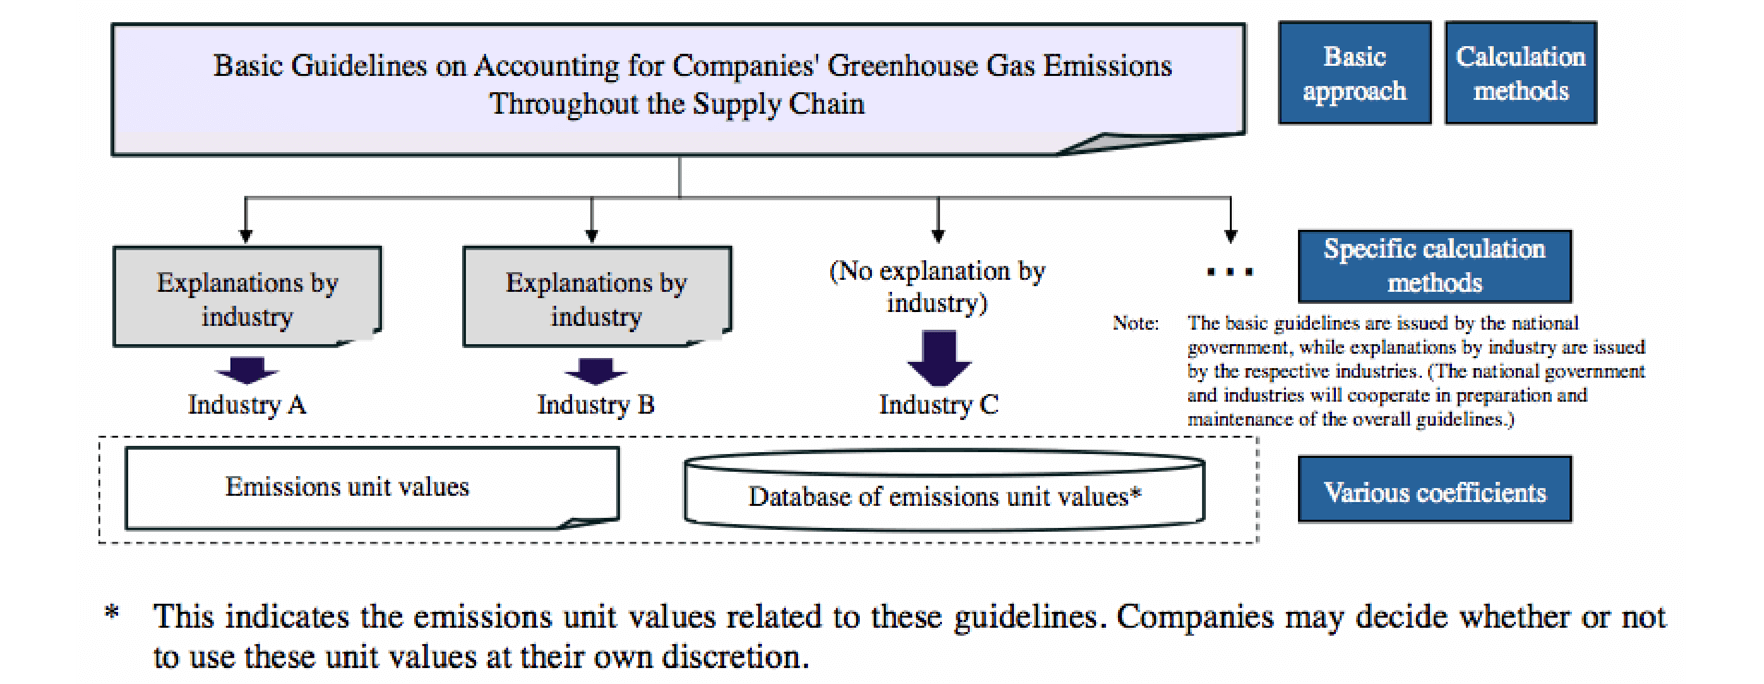 structure and features of guidelines in Japan